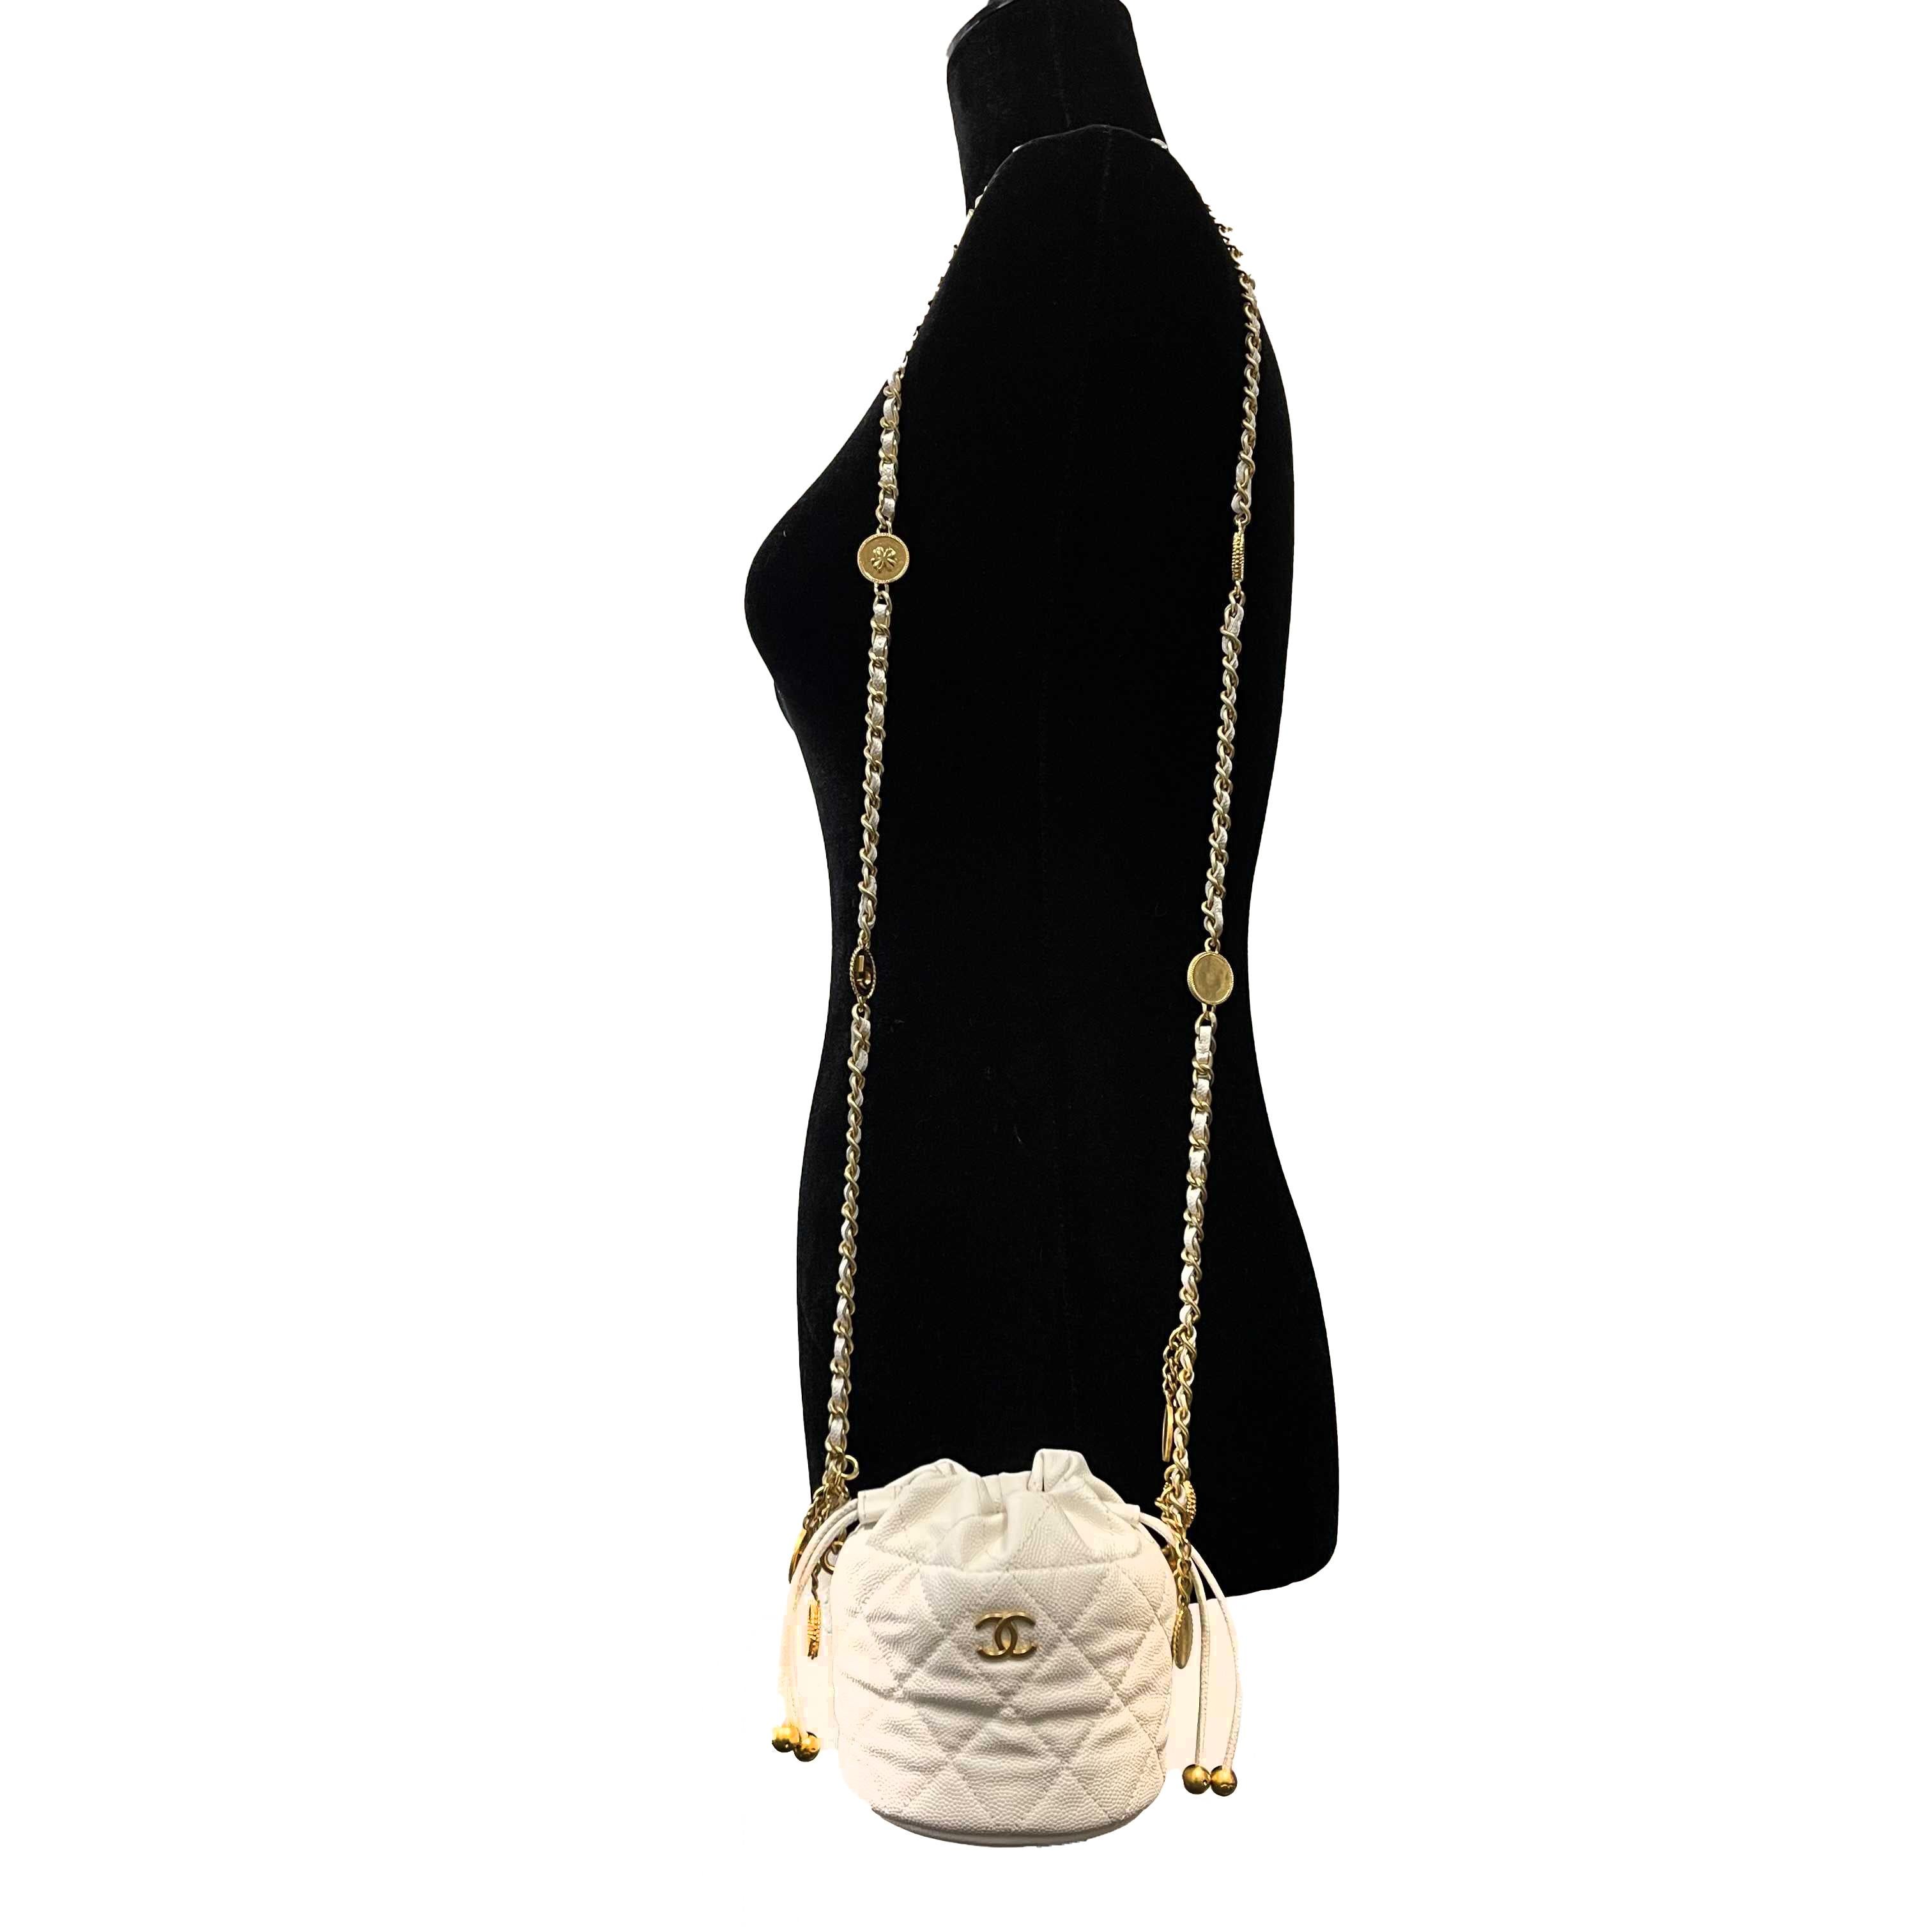 CHANEL - NEW Mini Bucket Bag - White Caviar Leather / Gold 10 Coins CC Crossbody For Sale 3